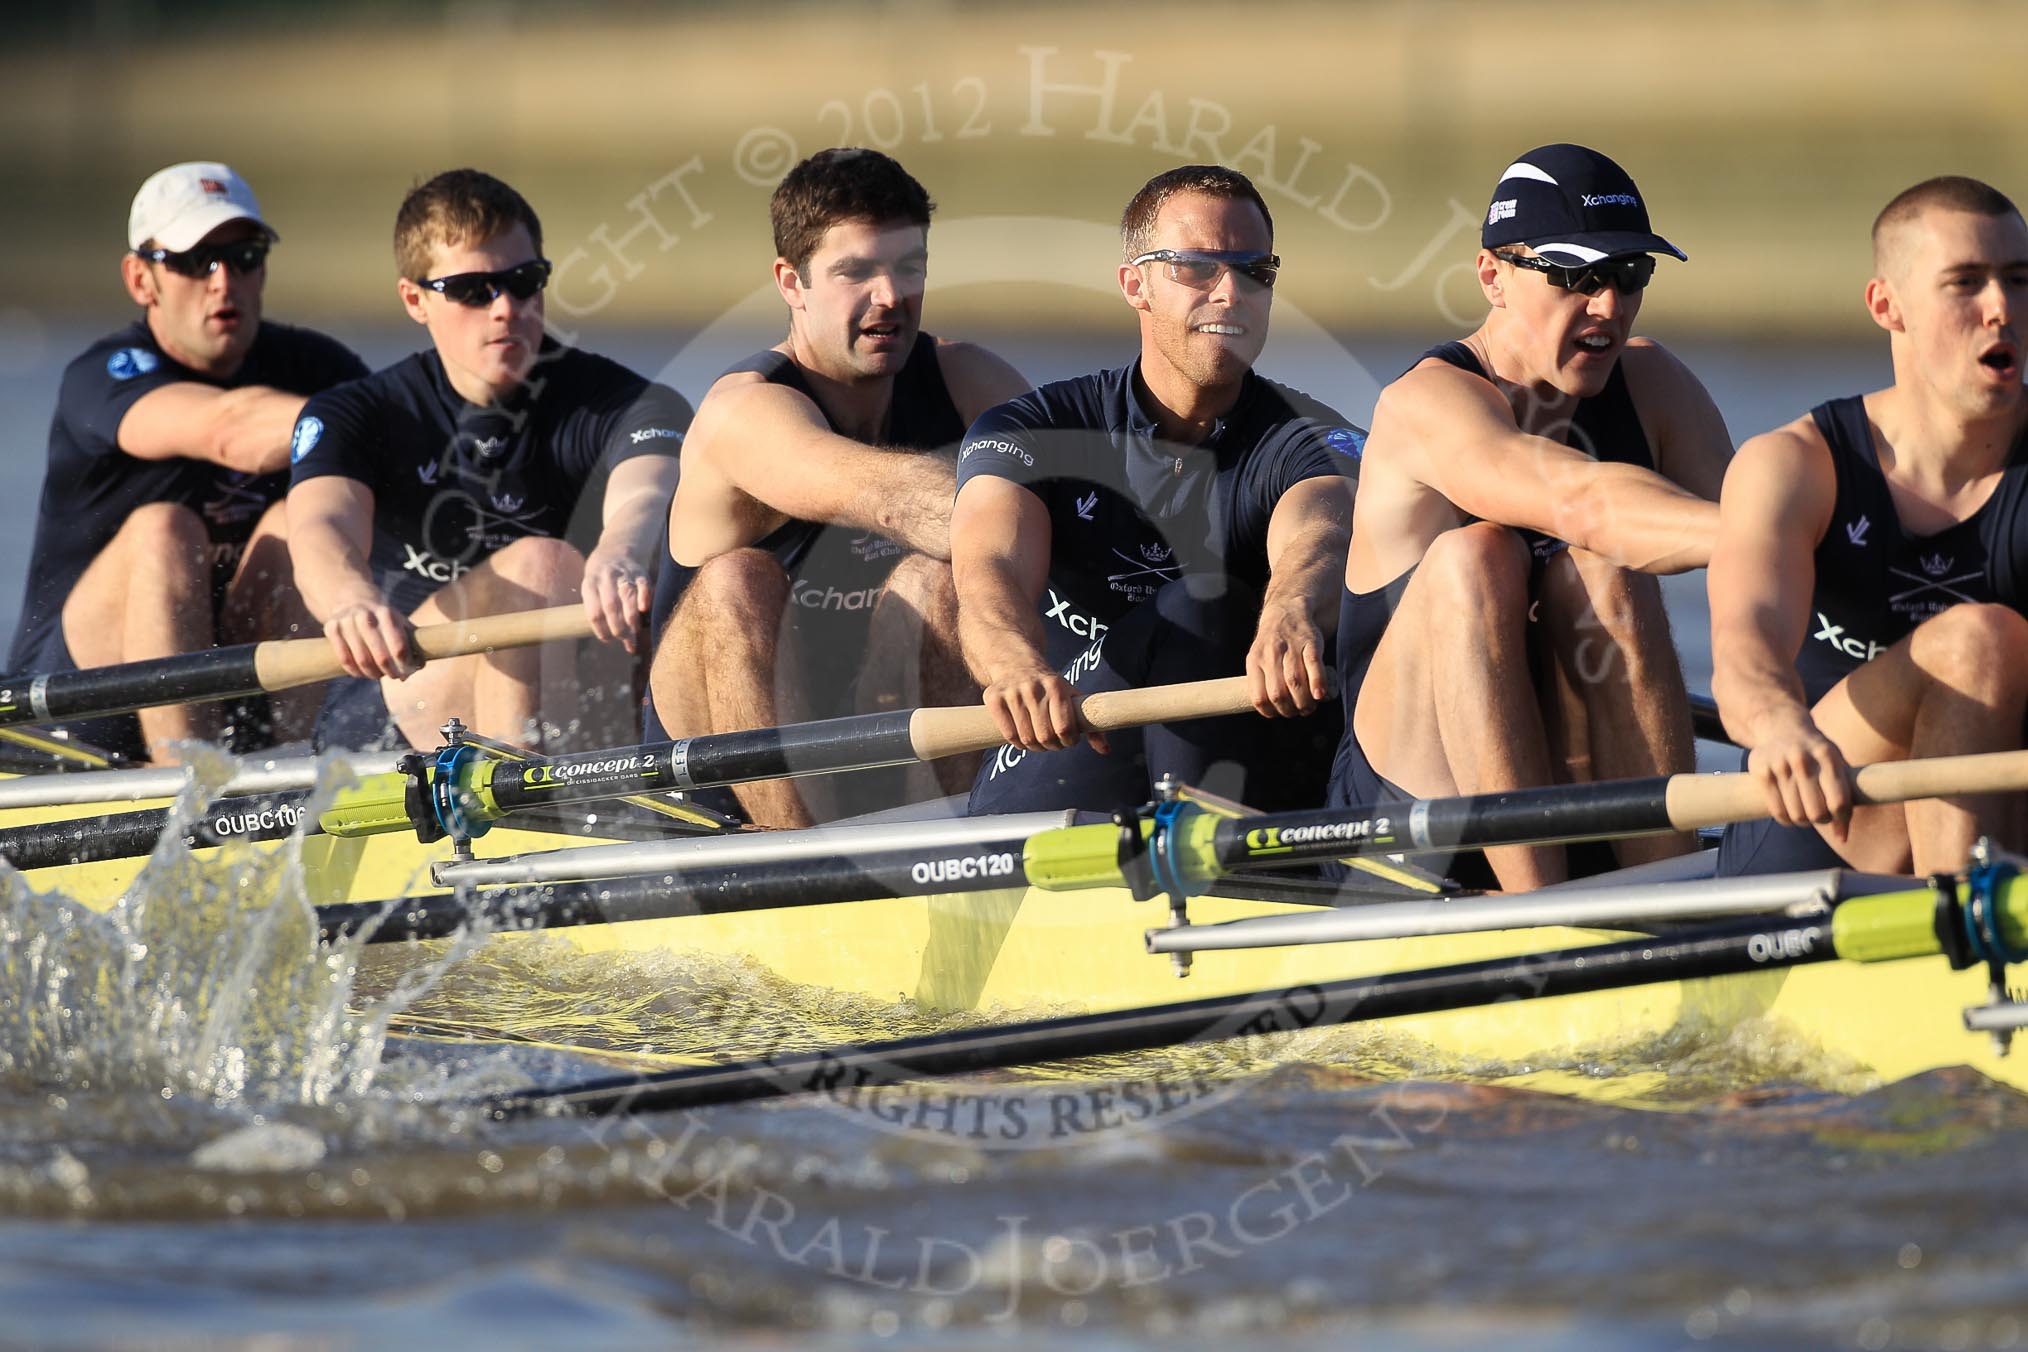 The Boat Race season 2012 - fixture OUBC vs German U23: The Oxford Blue Boat at the start of the race, from left to right Bow Dr. Alexander Woods, Geordie MacLeod, Kevin Baum, Dr. Hanno Wienhausen, Karl Hudspith, and Alex Davidson..
River Thames between Putney and Mortlake,
London,

United Kingdom,
on 26 February 2012 at 15:26, image #48